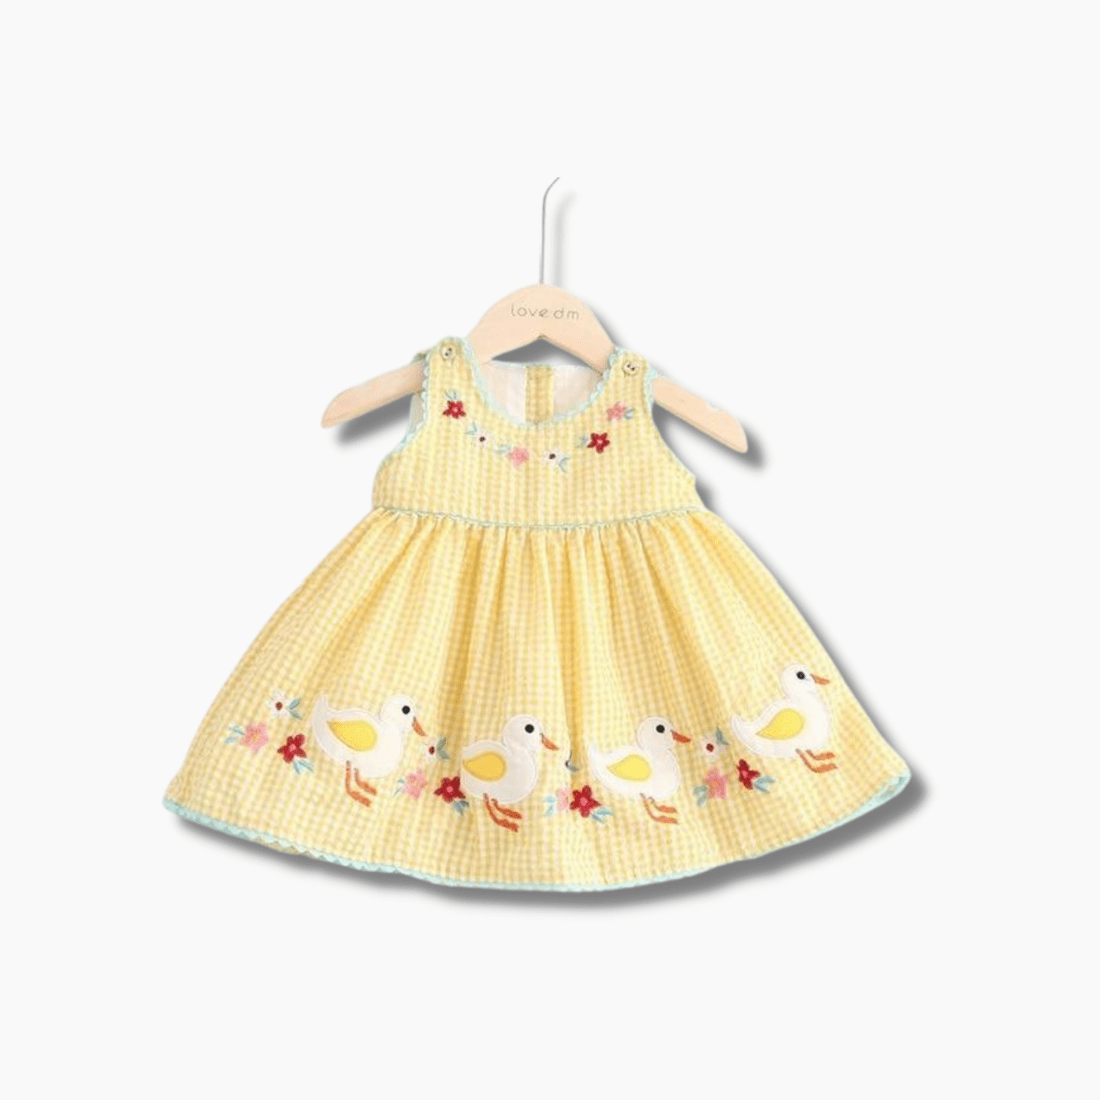 Girl's Clothing Vintage Duck Dress